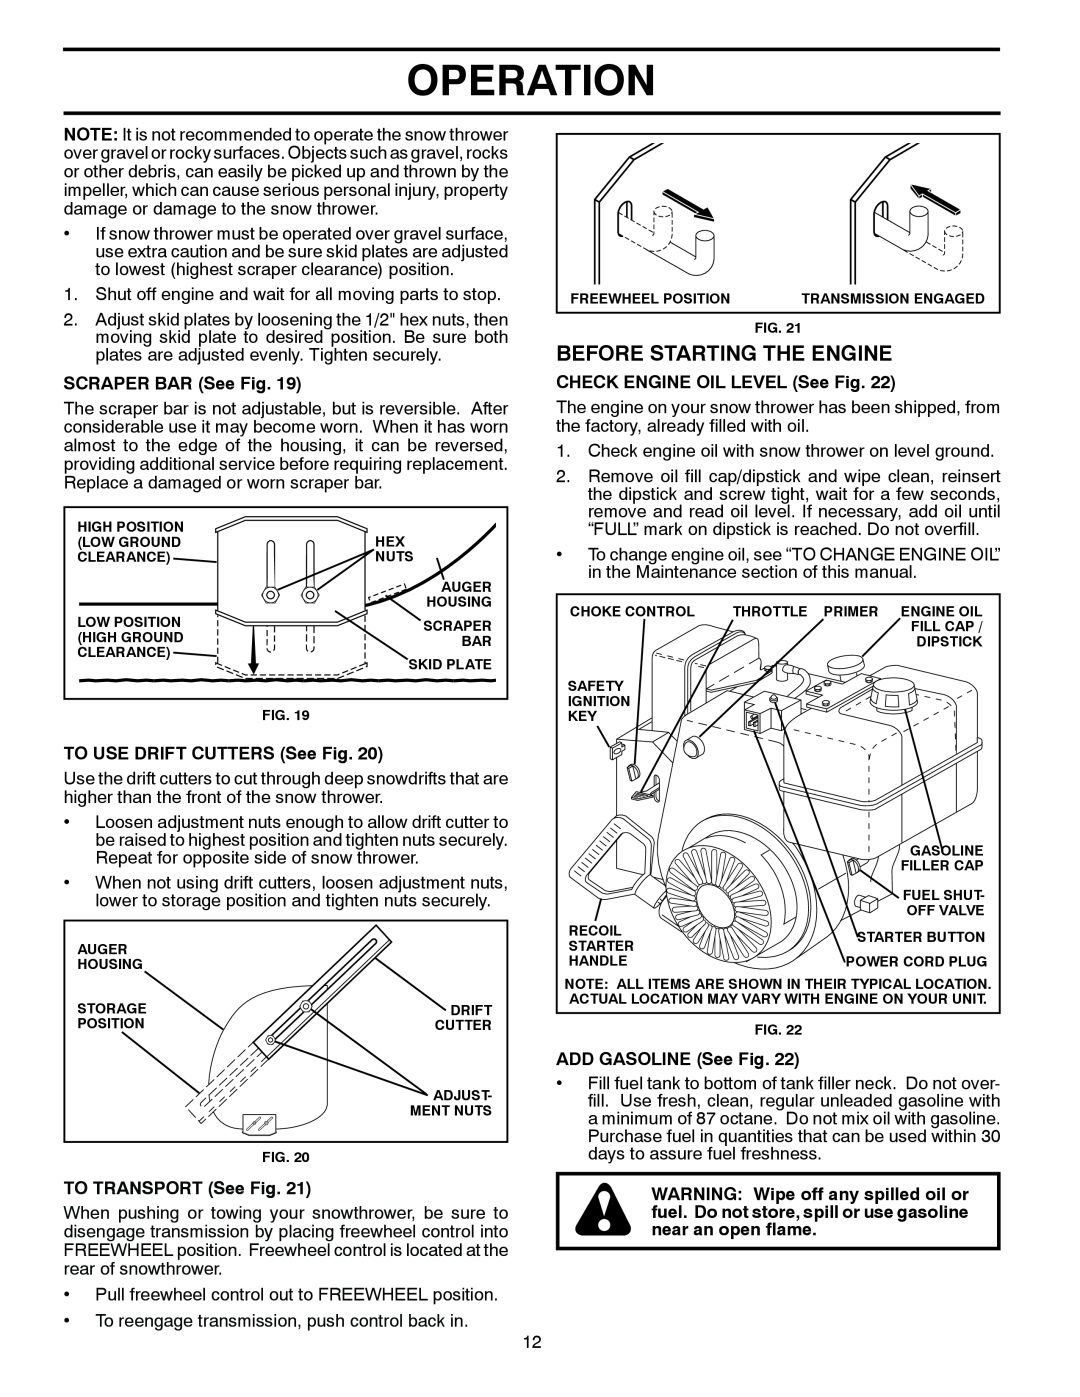 Husqvarna 924SB-XLS owner manual Before Starting The Engine, Operation, SCRAPER BAR See Fig, CHECK ENGINE OIL LEVEL See Fig 